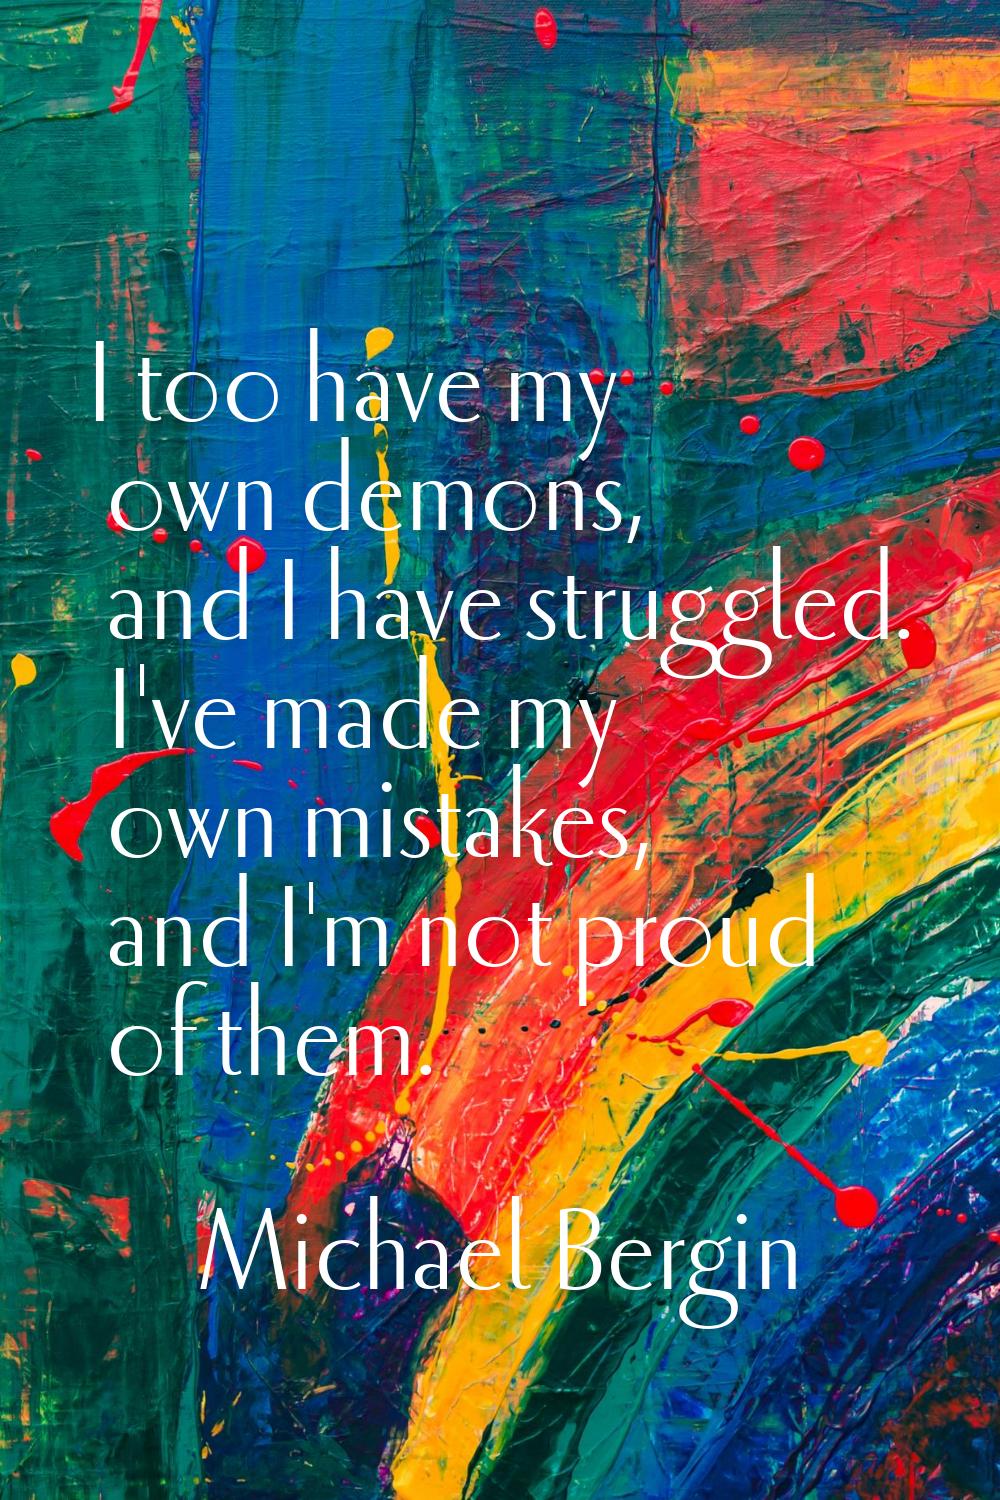 I too have my own demons, and I have struggled. I've made my own mistakes, and I'm not proud of the